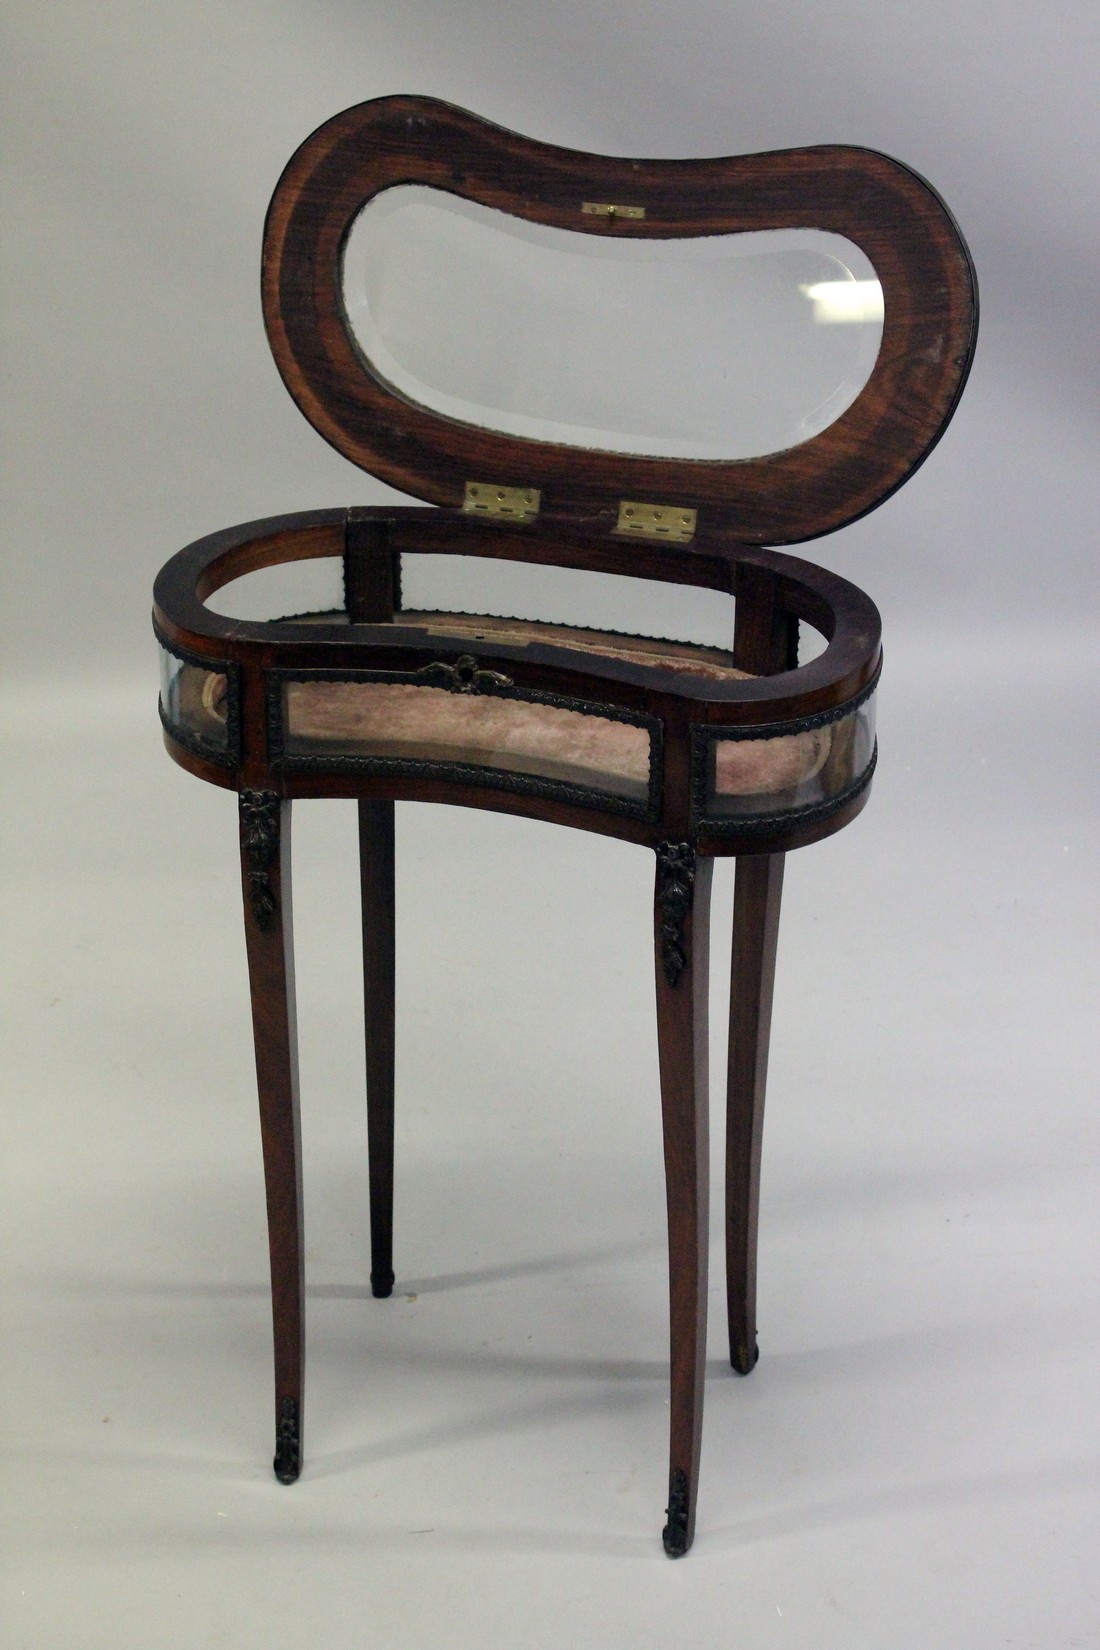 A GOOD 19TH CENTURY FRENCH ROSEWOOD AND MARQUETRY KIDNEY SHAPED BIJOUTERIE TABLE inlaid with - Image 5 of 6